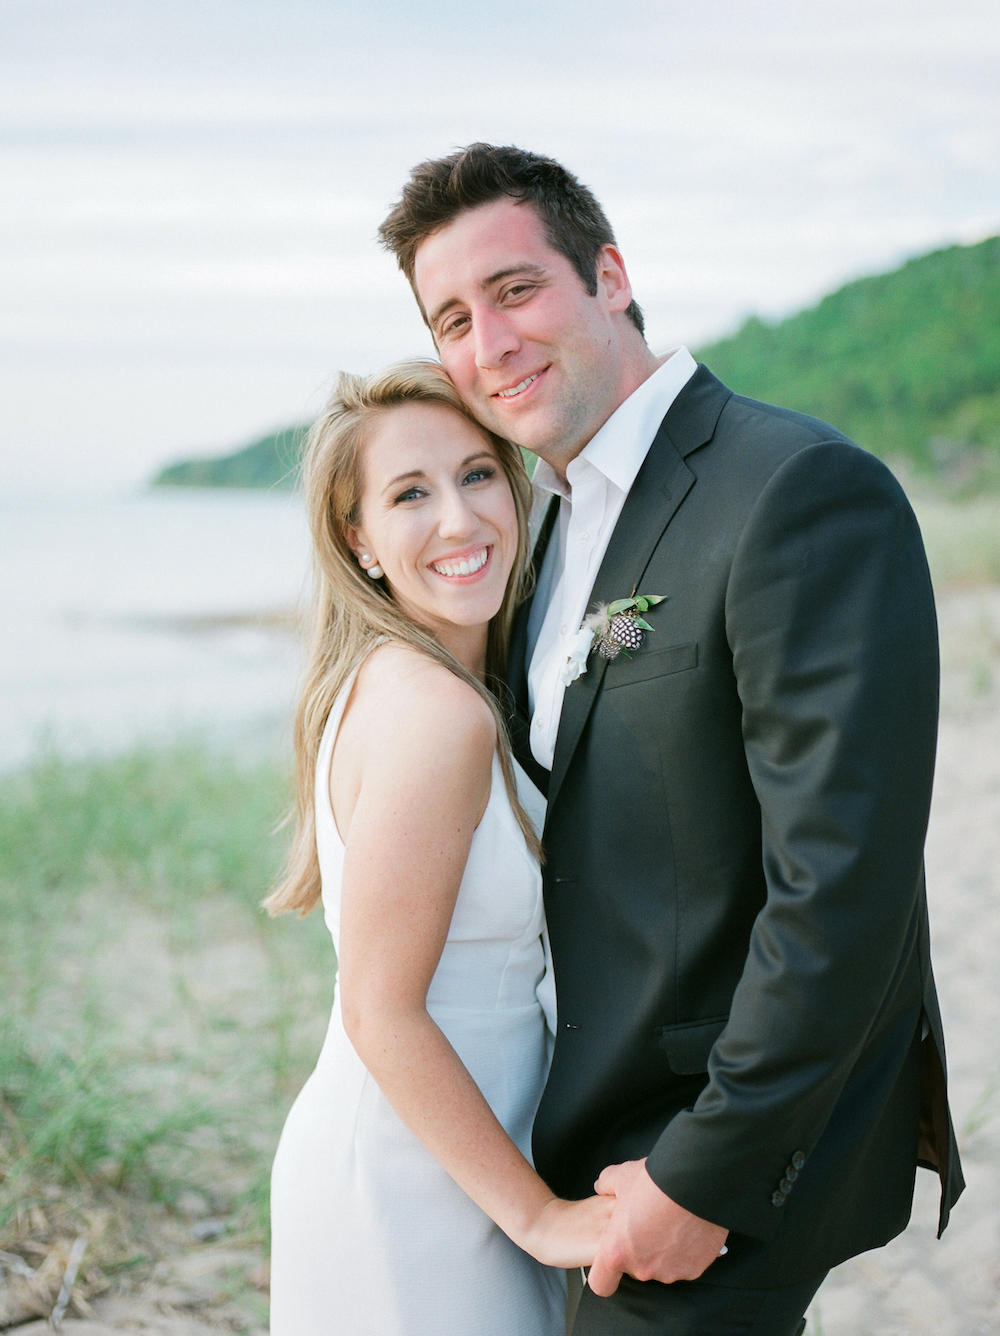 A couple smiling on the beach in Glen Arbor, Michigan